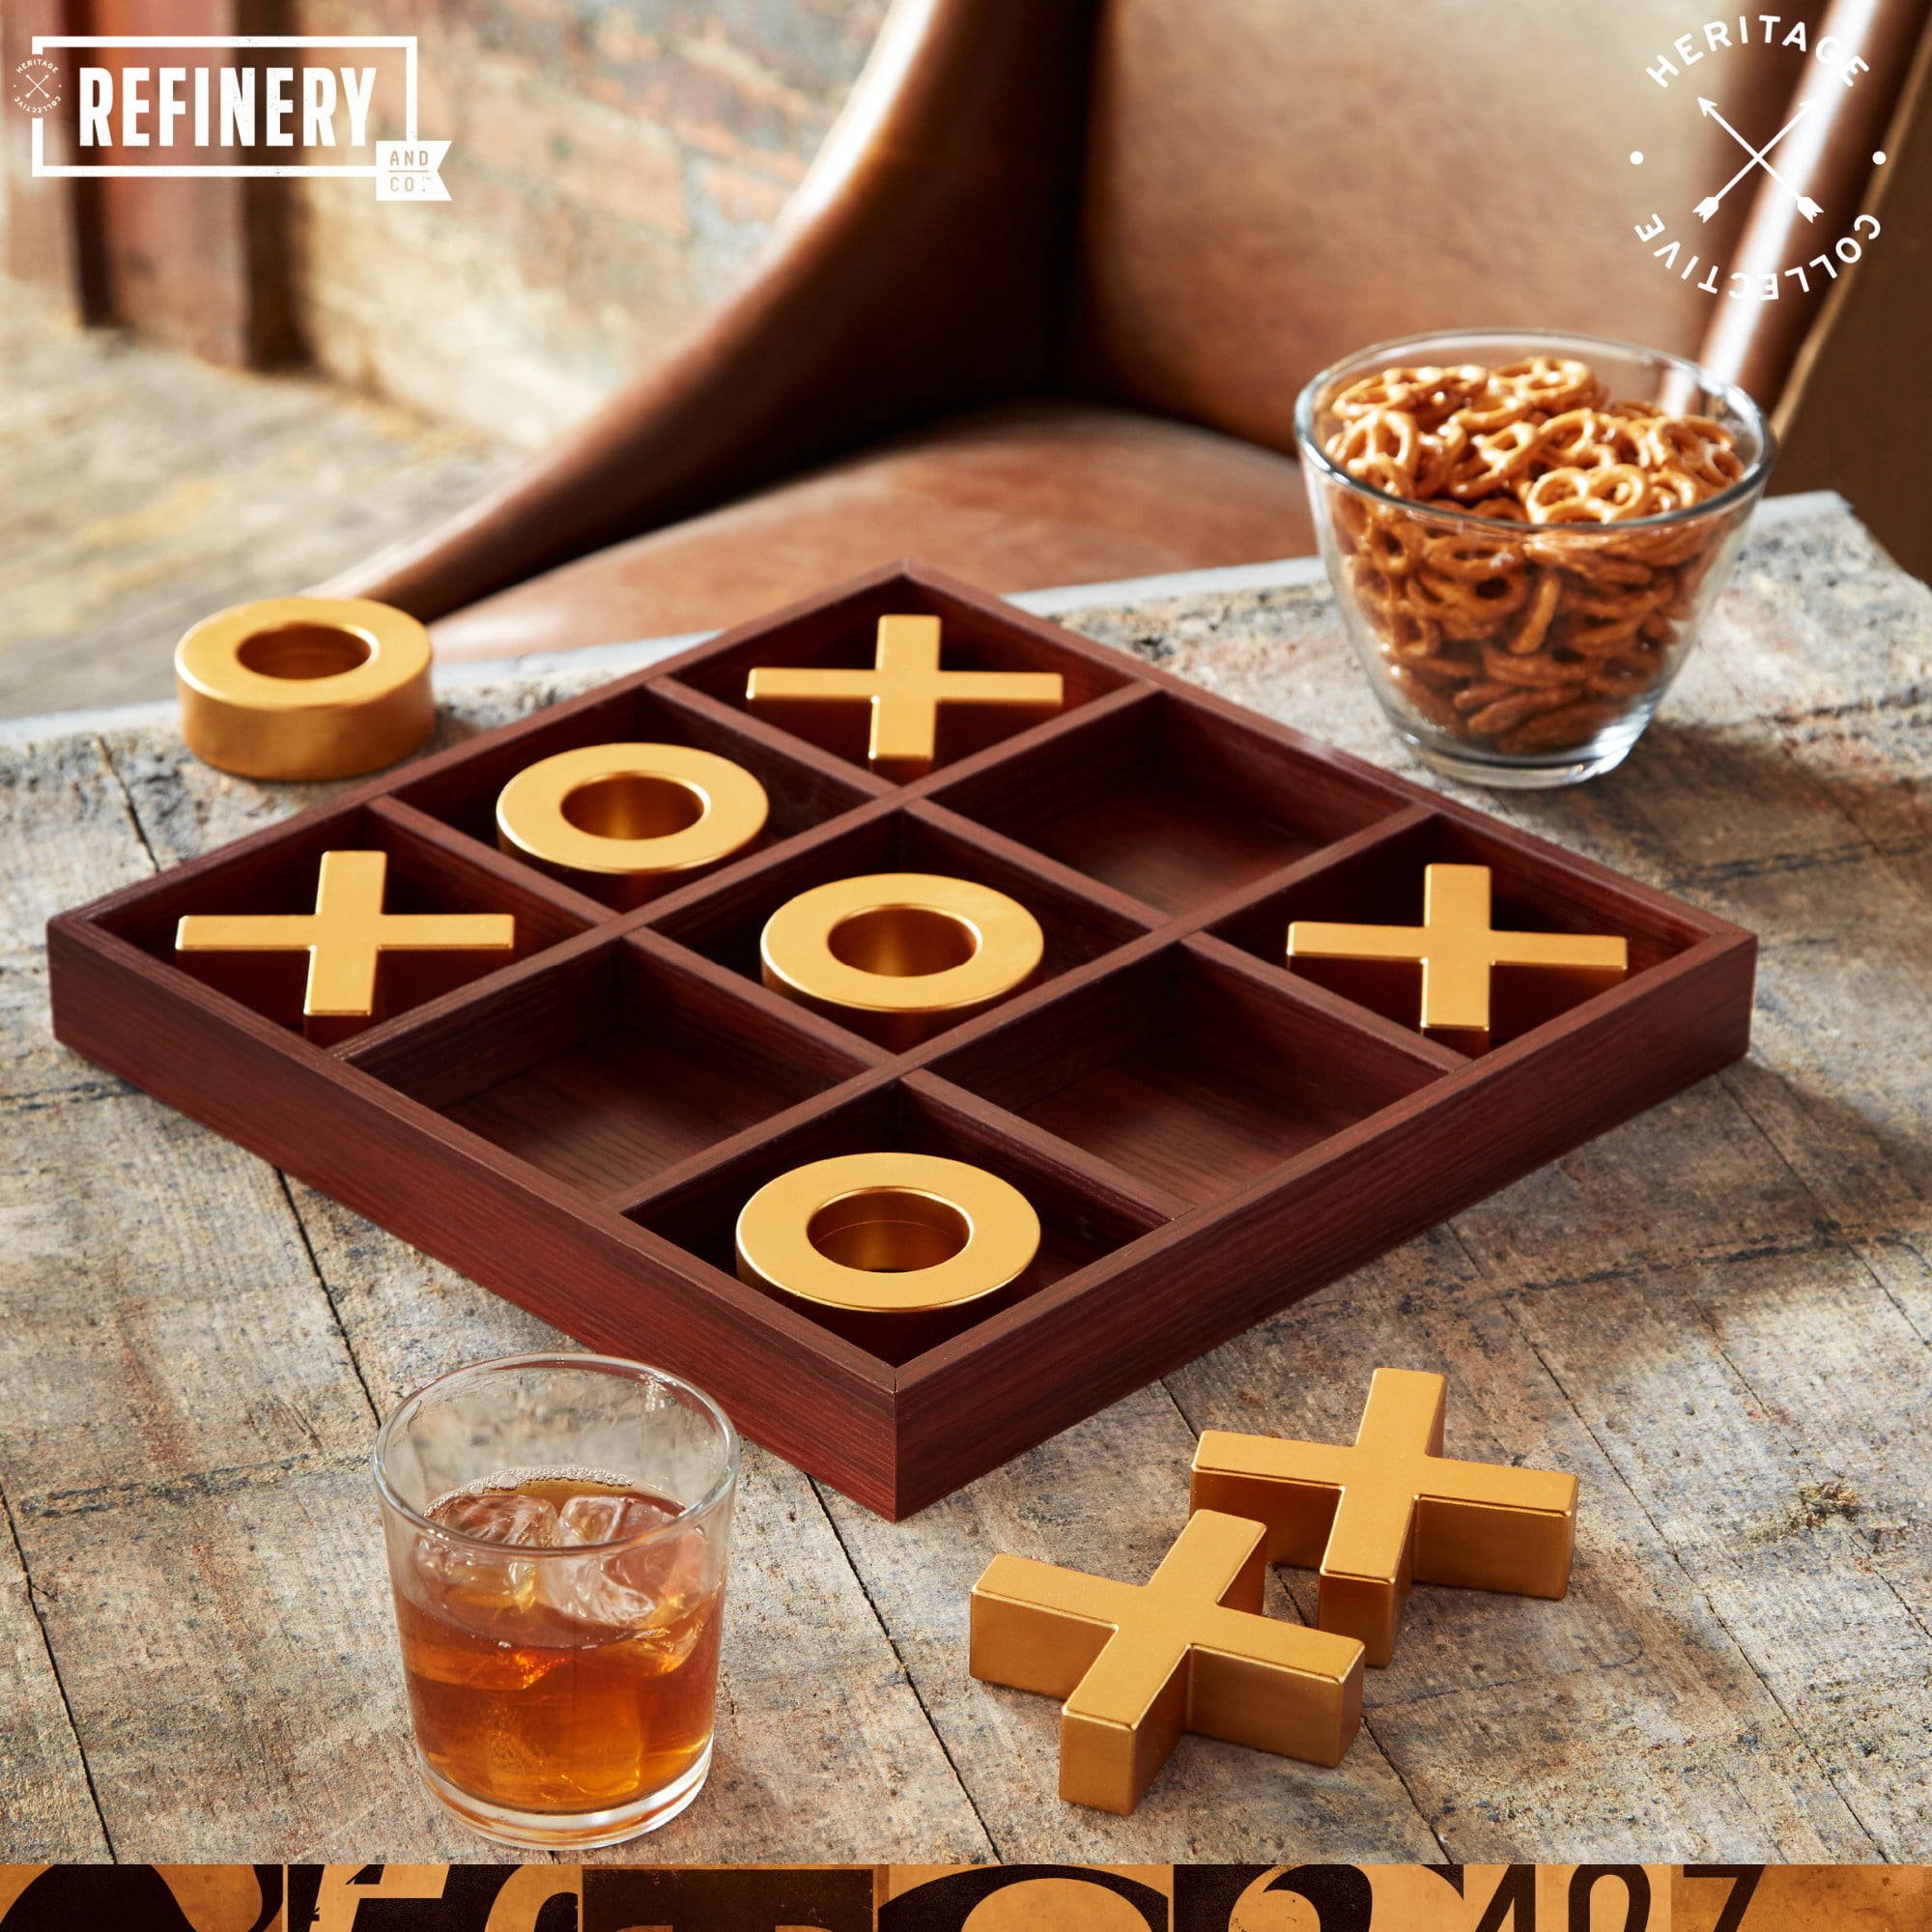 Burnished Ceramic Tic-Tac-Toe Board from Mexico - Burnished Challenge